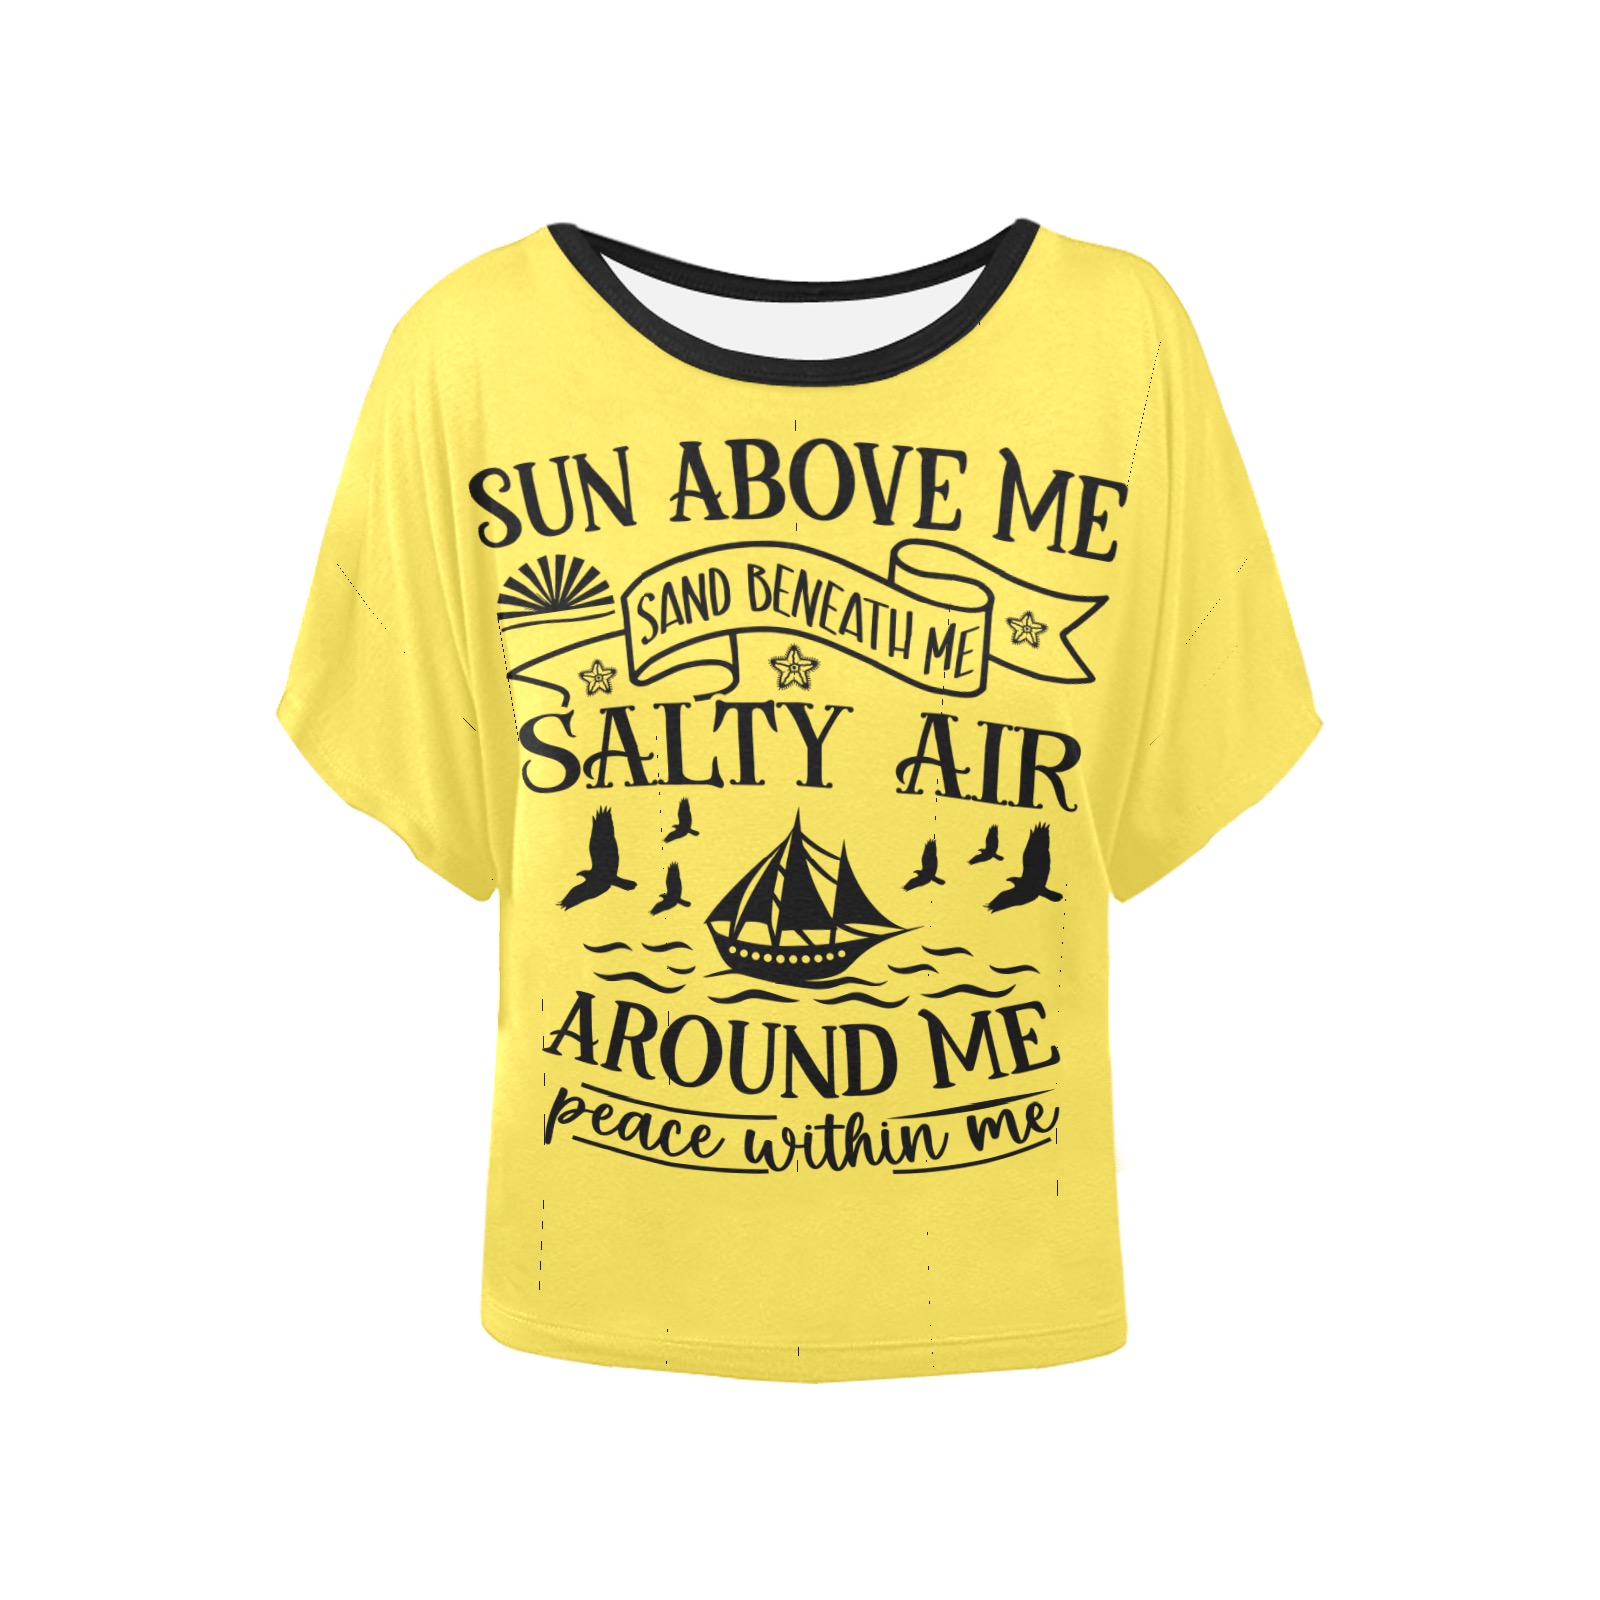 Rm0518 - 18 Sun above me sand beneath me salty air Women's Batwing-Sleeved Blouse T shirt (Model T44)